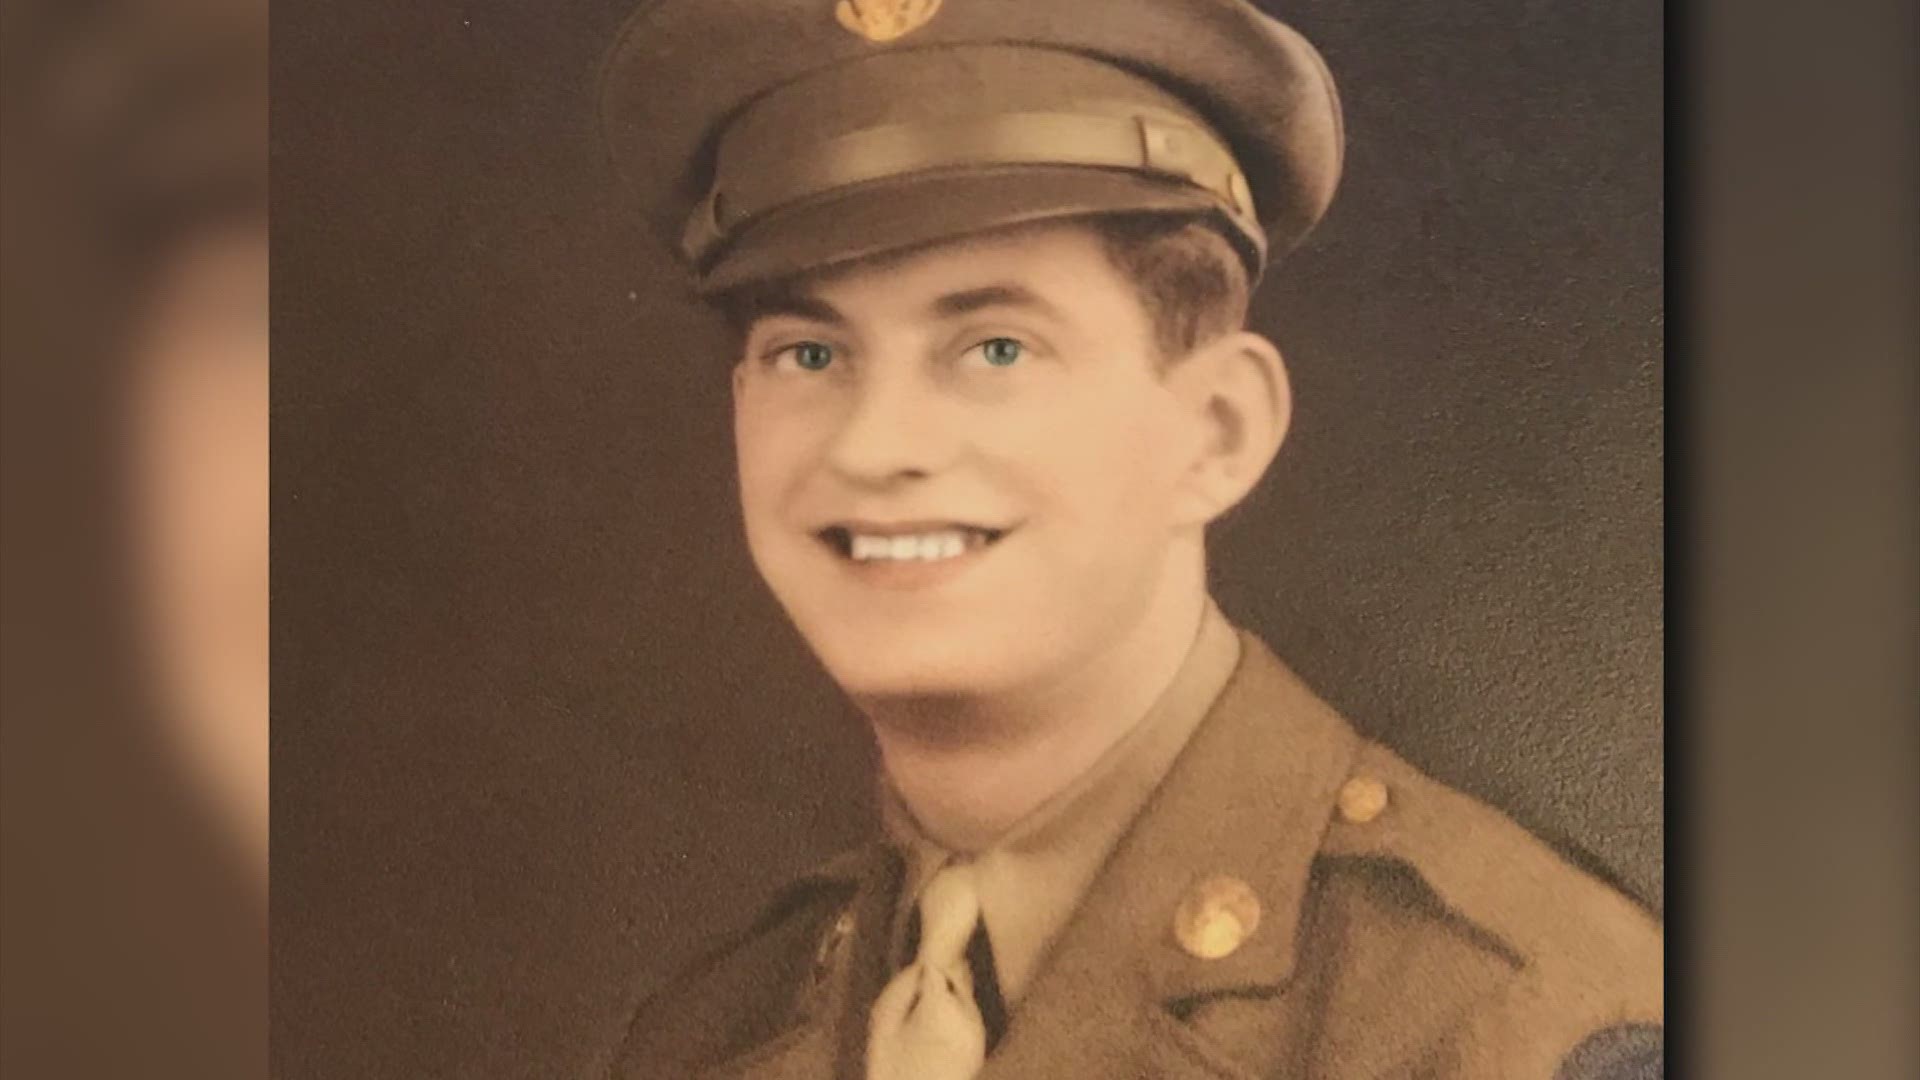 Technical Sergeant Alfred Turgeon was killed during a 1943 battle in Romania and buried in an unmarked grave. Only recently was he identified and brought home.